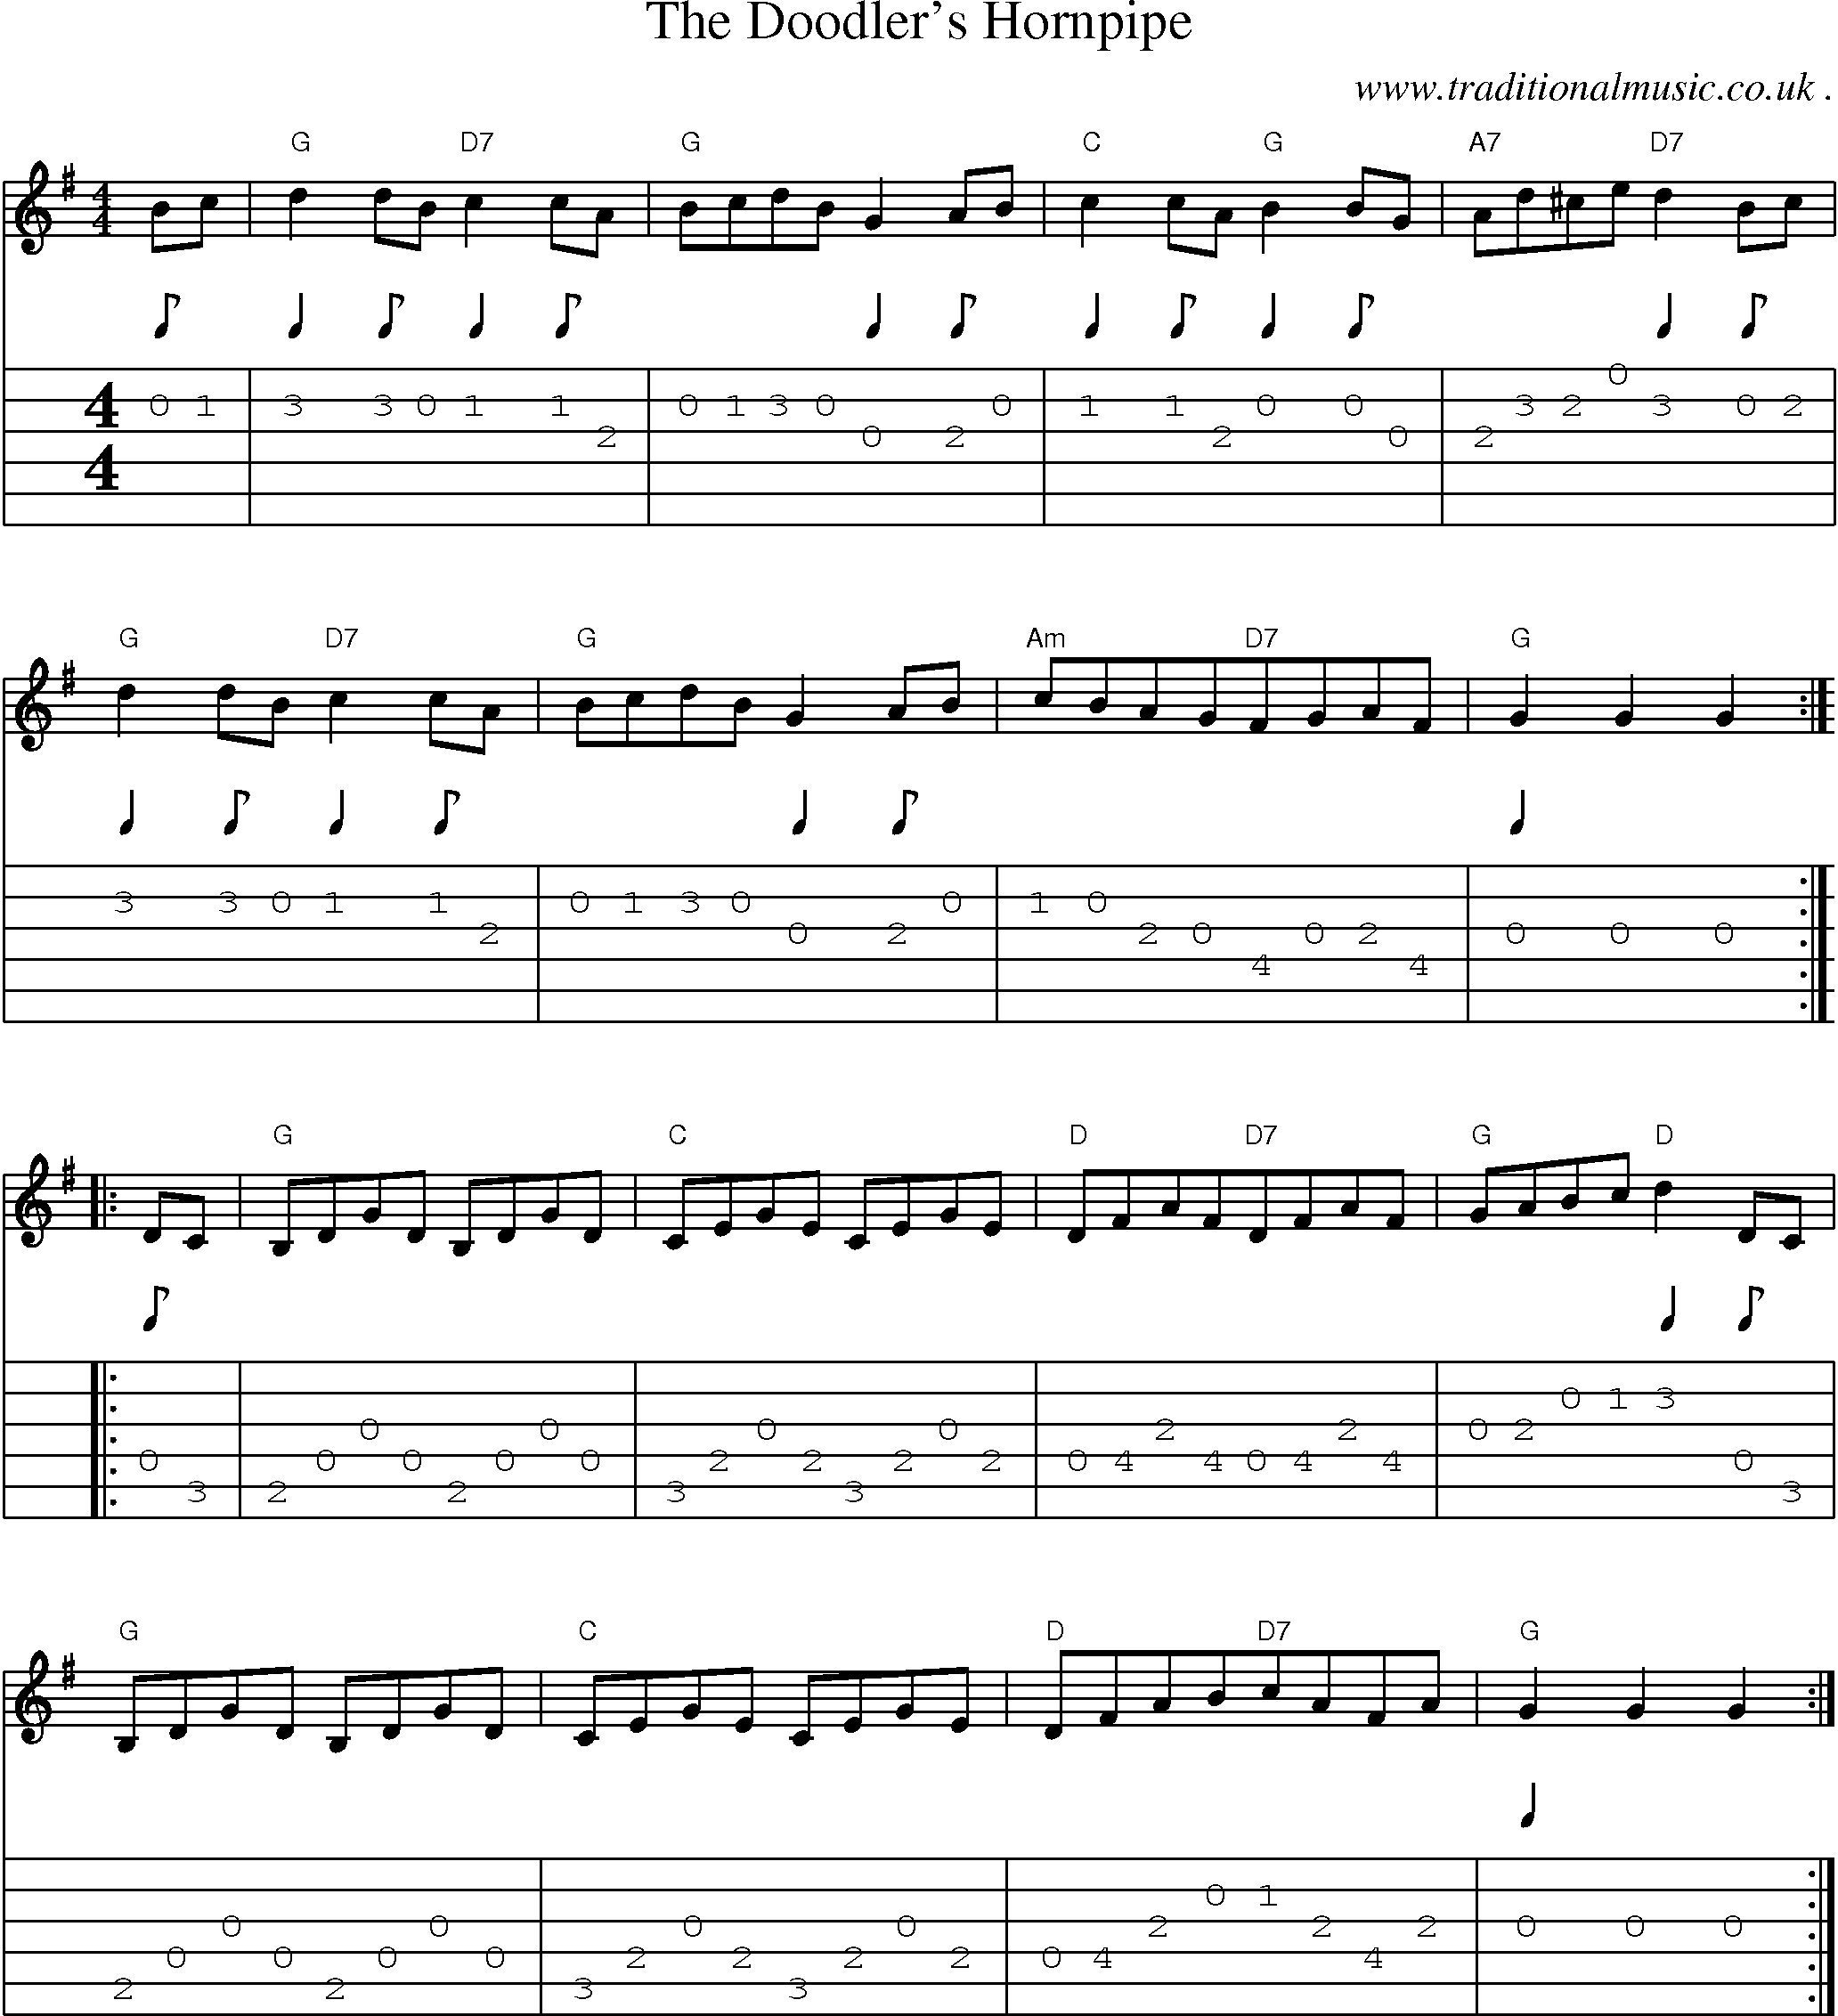 Sheet-Music and Guitar Tabs for The Doodlers Hornpipe